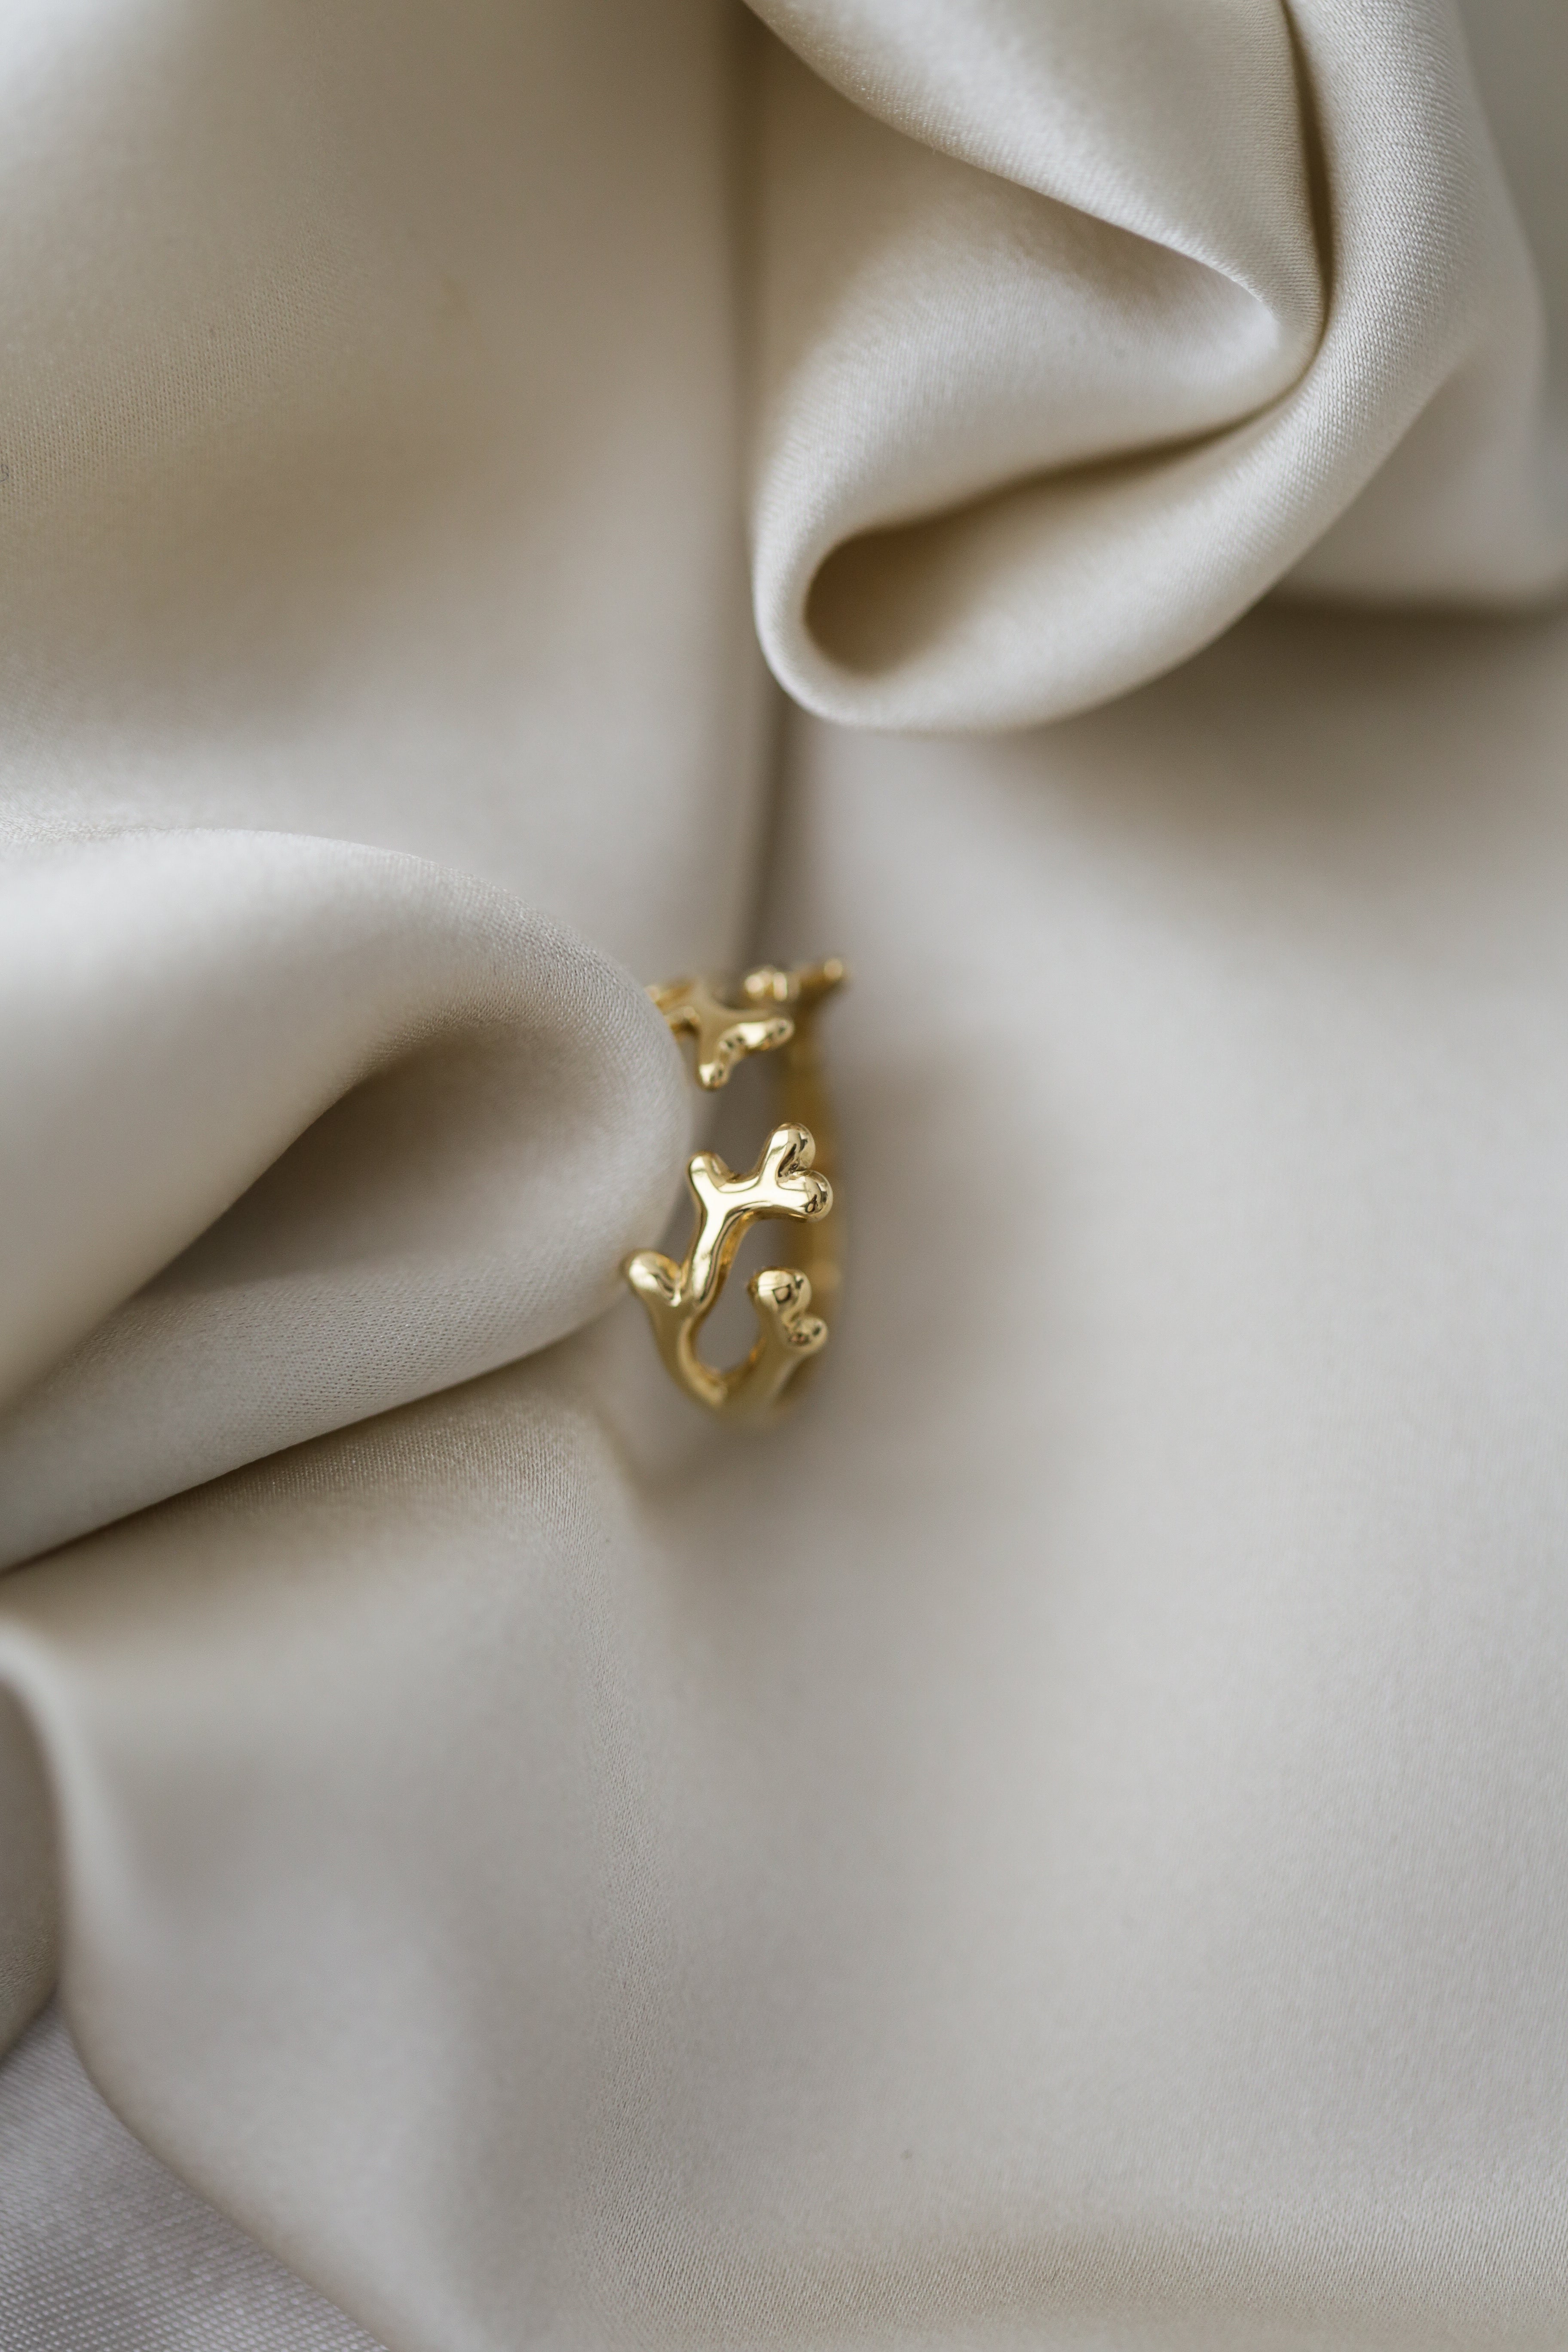 Xabrina Ring - Boutique Minimaliste has waterproof, durable, elegant and vintage inspired jewelry